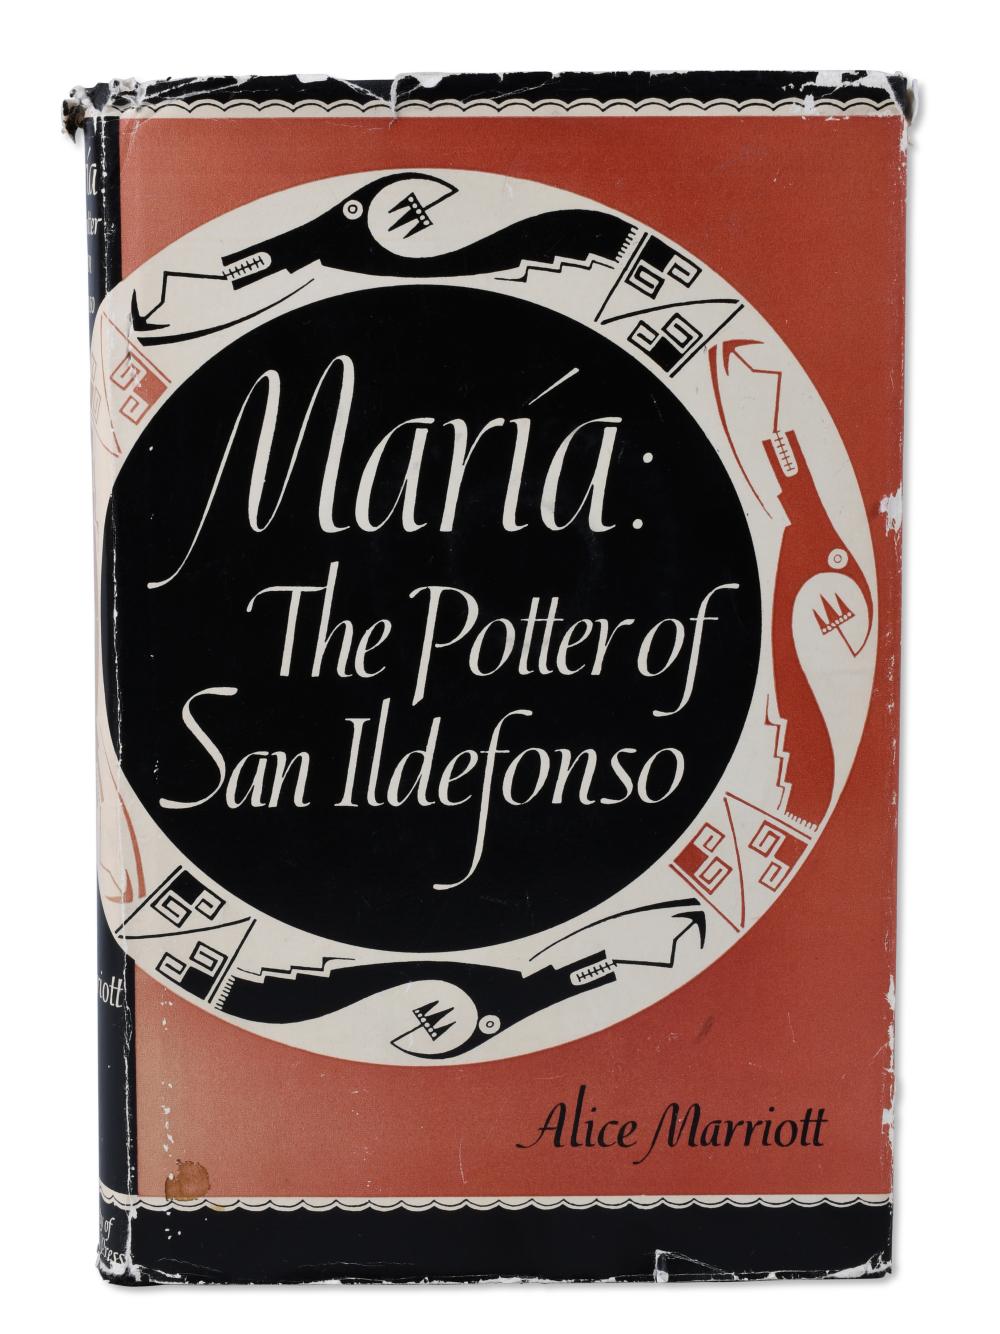 MARIA: THE POTTER OF SAN ILDEFONSO.